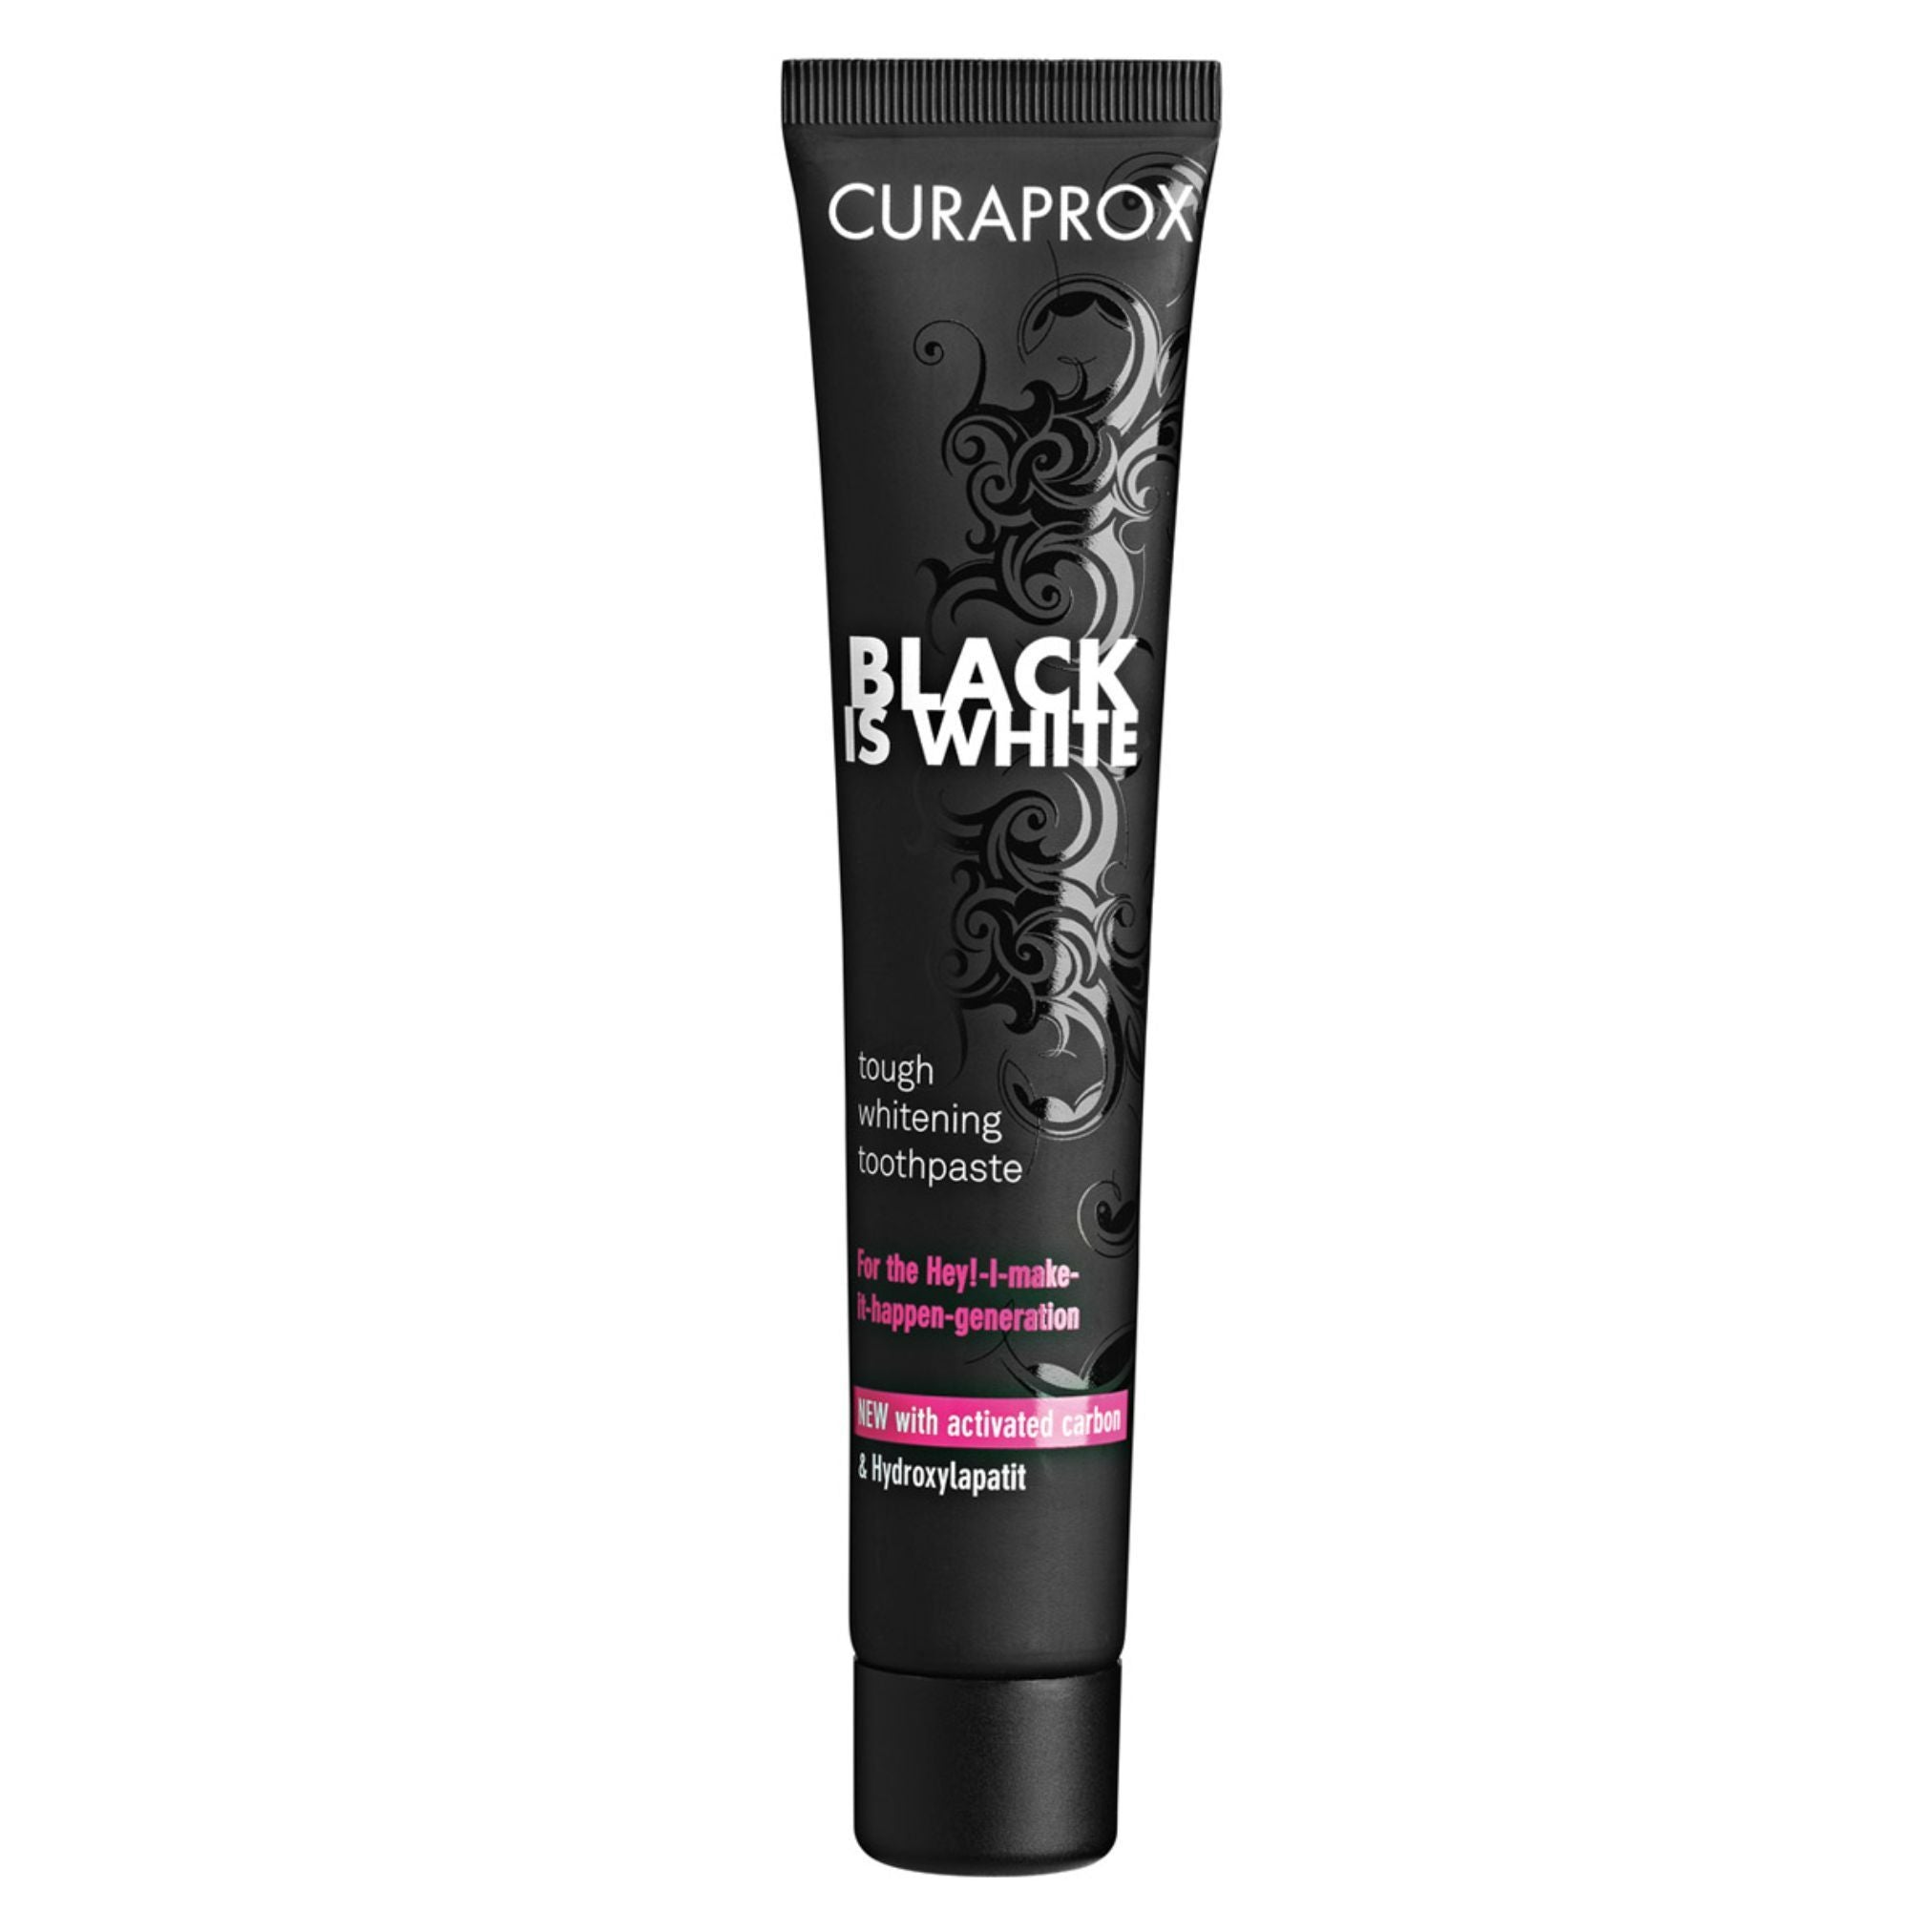 Curaprox Black is White Tough Whitening Toothpaste 90ml + Toothbrush